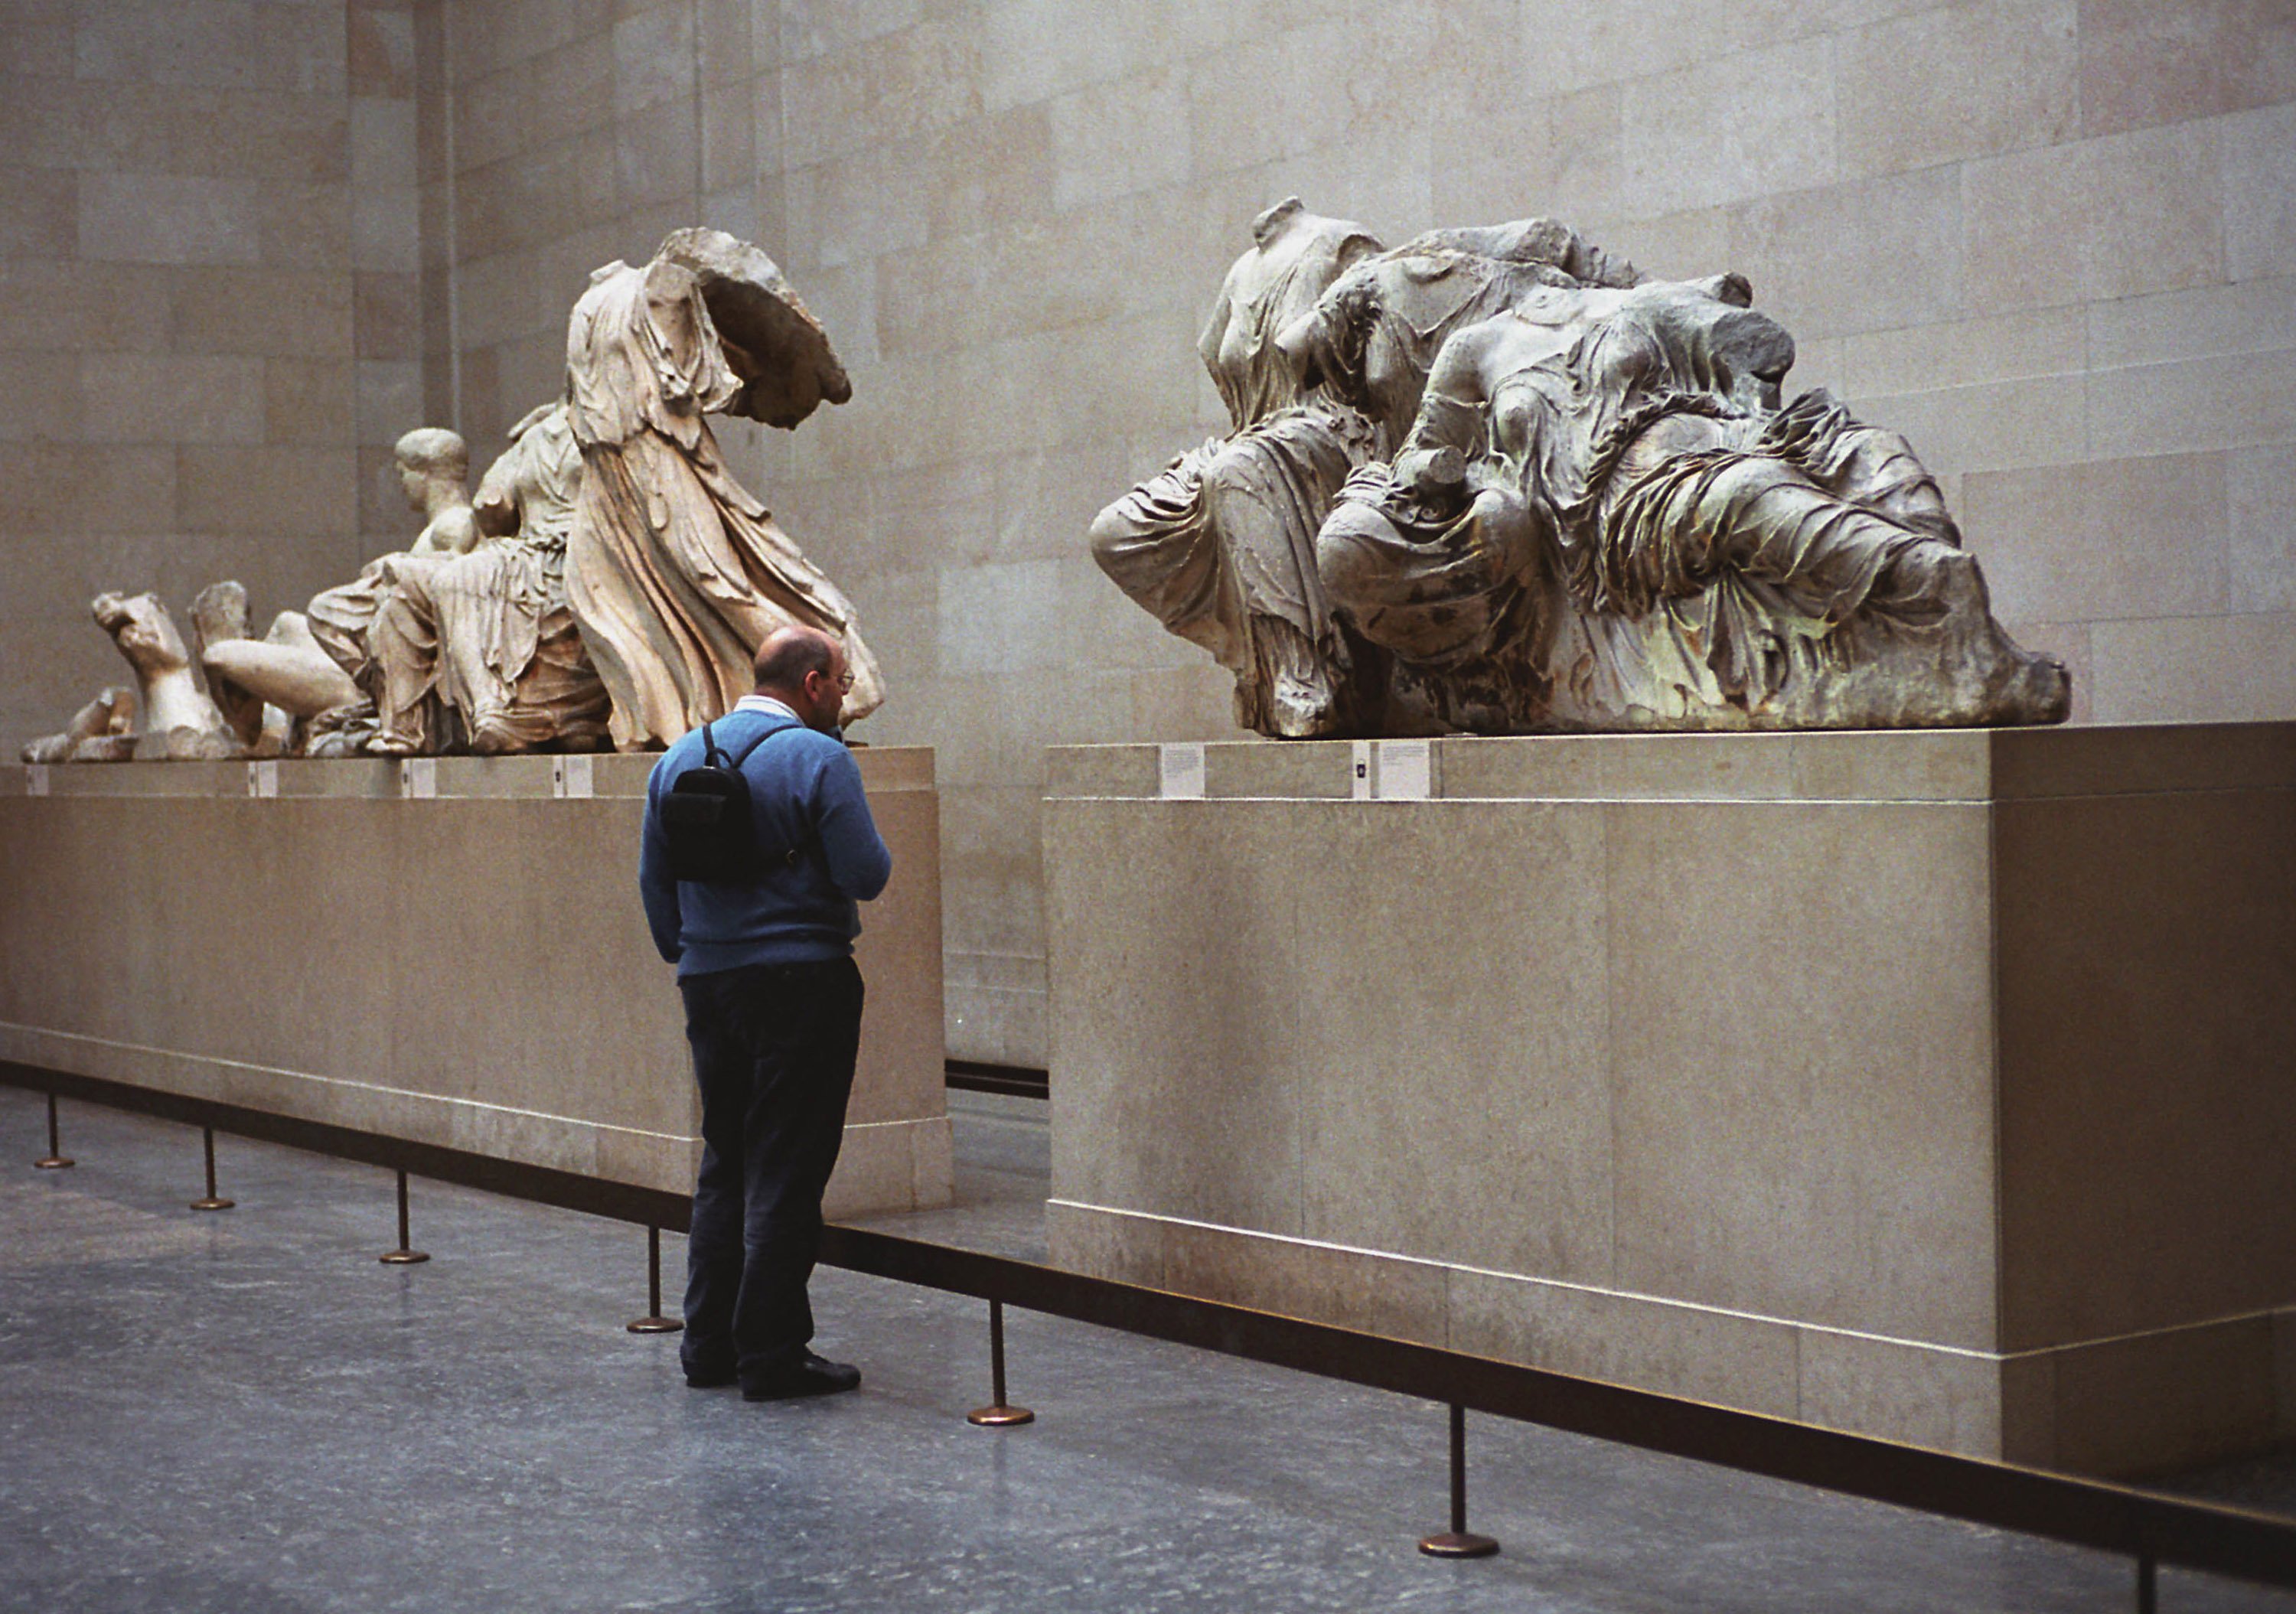 Dispelling Rumors, Greece Has Rejected the British Museum's Offer to Return  the Parthenon Marbles as a Long-Term Loan